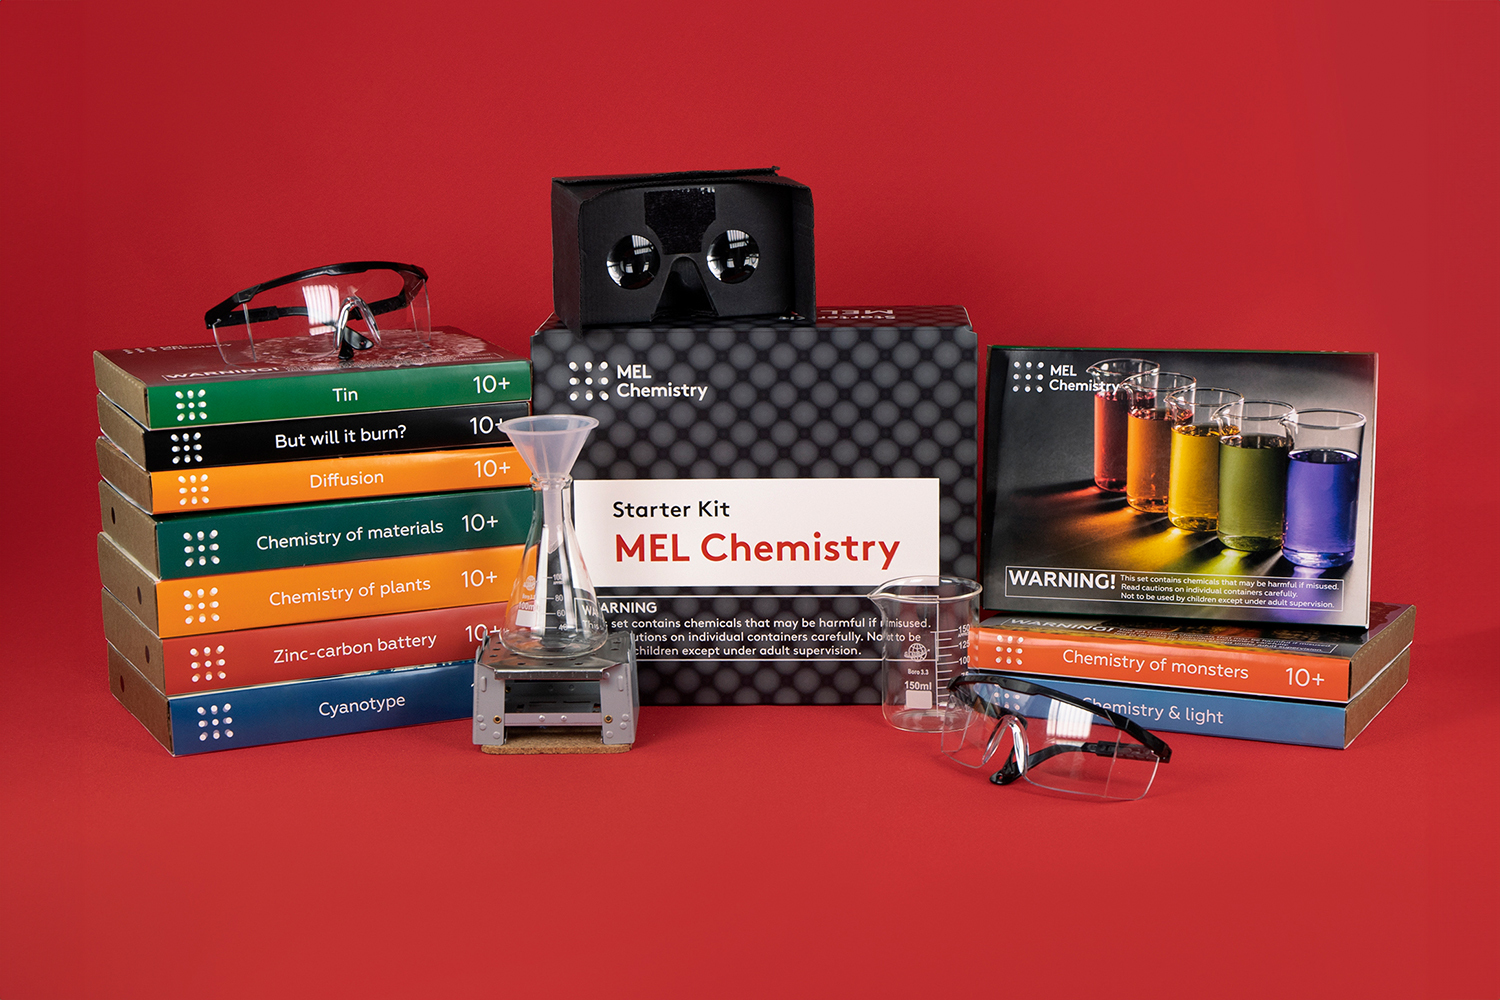 A chemistry set perfect for Christmas presents for 10 year olds exploring the wonders of science